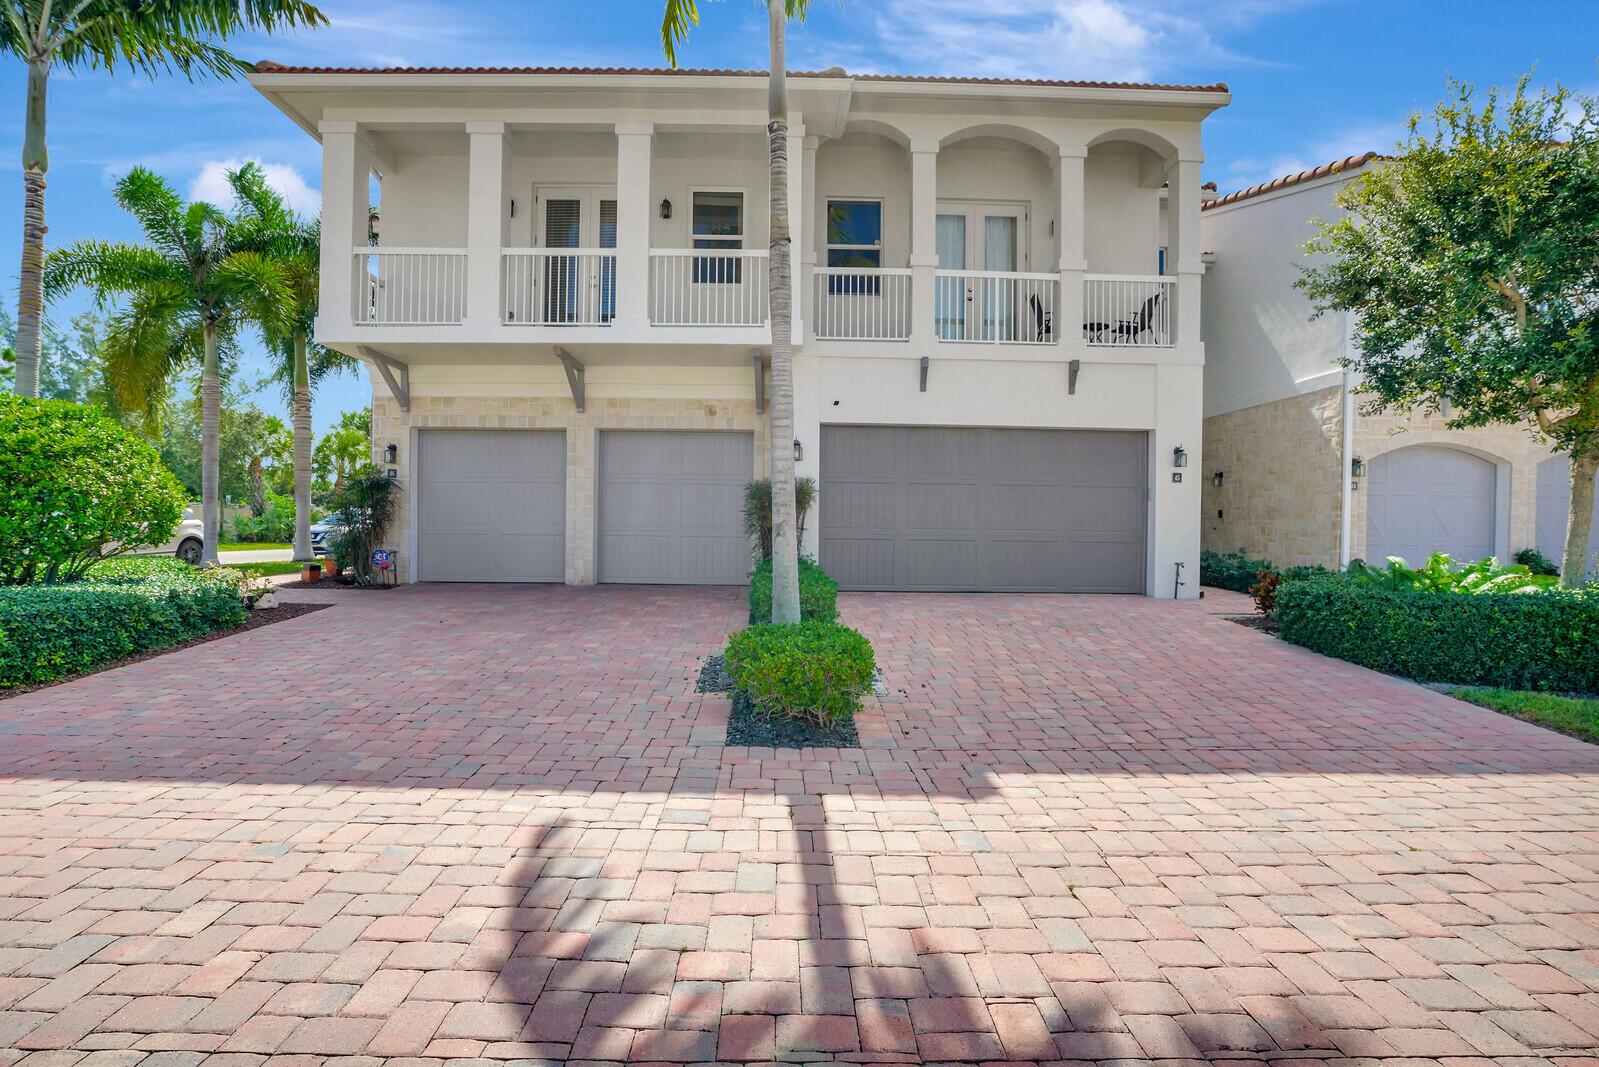 STUNNING, 3BR/2.5BA townhome in east Boca's Valetta community. Enter & be greeted by a light, bright, open floor plan with tasteful, elegant, dark wood, stainless & quartzite kitchen, living room & dining room. Private home office. First floor boasts high-gloss porcelain tile throughout. On the upper level, find primary suite with 2 additional bedrooms & bath, & a spacious loft offering a multitude of possibilities. Gorgeous maple wood flooring adds to the elegance of the 2nd floor. Covered, grill area & extended patio perfect for peaceful evenings or family gatherings. Custom window treatments, crown moulding & 2 car epoxy coated garage round out what this home has to offer. Close to the best shopping, restaurants and ocean beaches. Check out your own piece of paradise today!